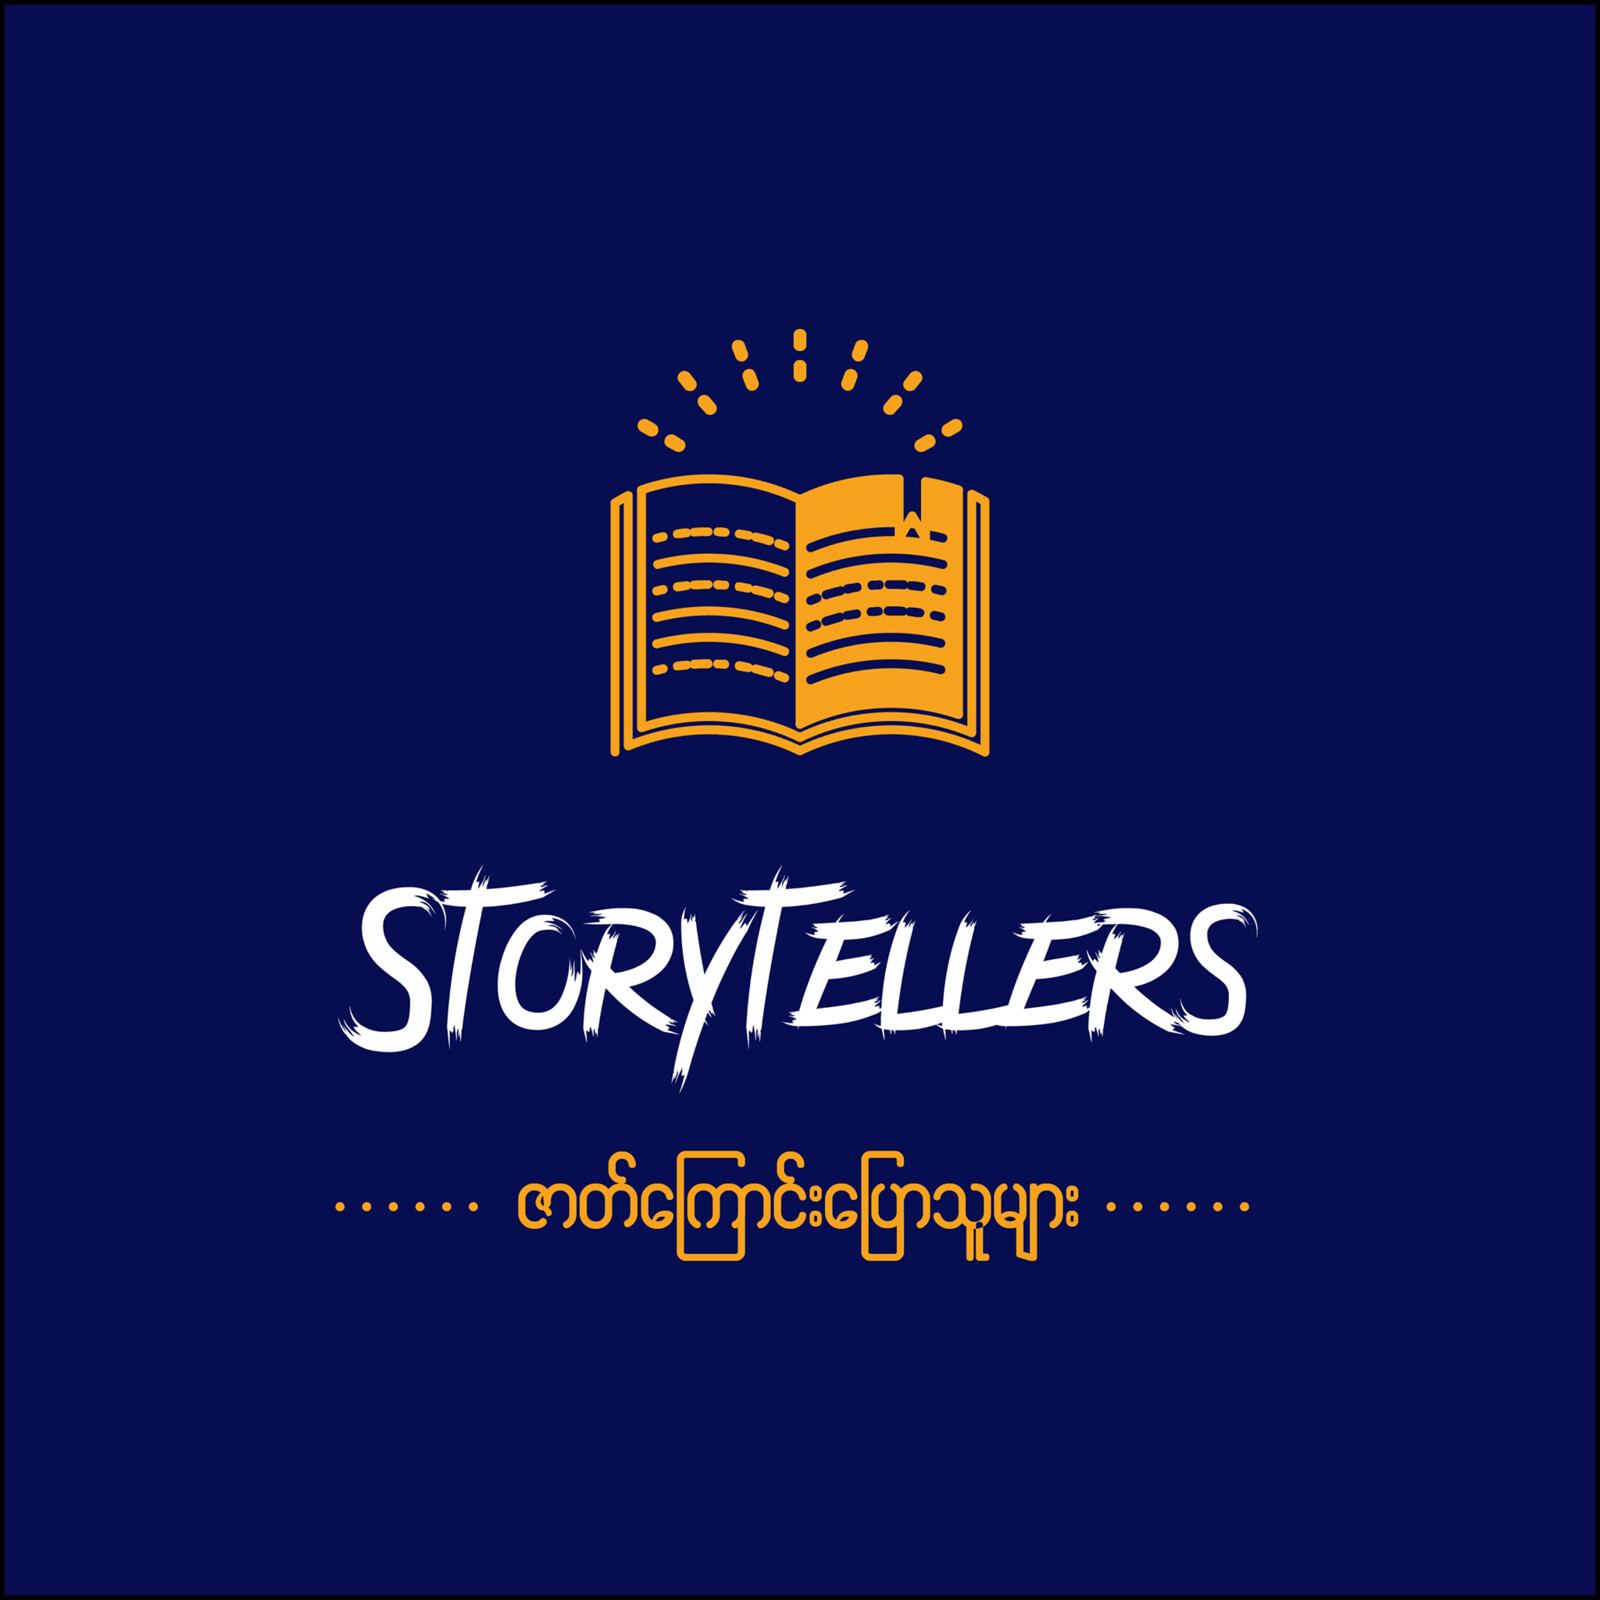 Storytellers (2) Blue and Yellow